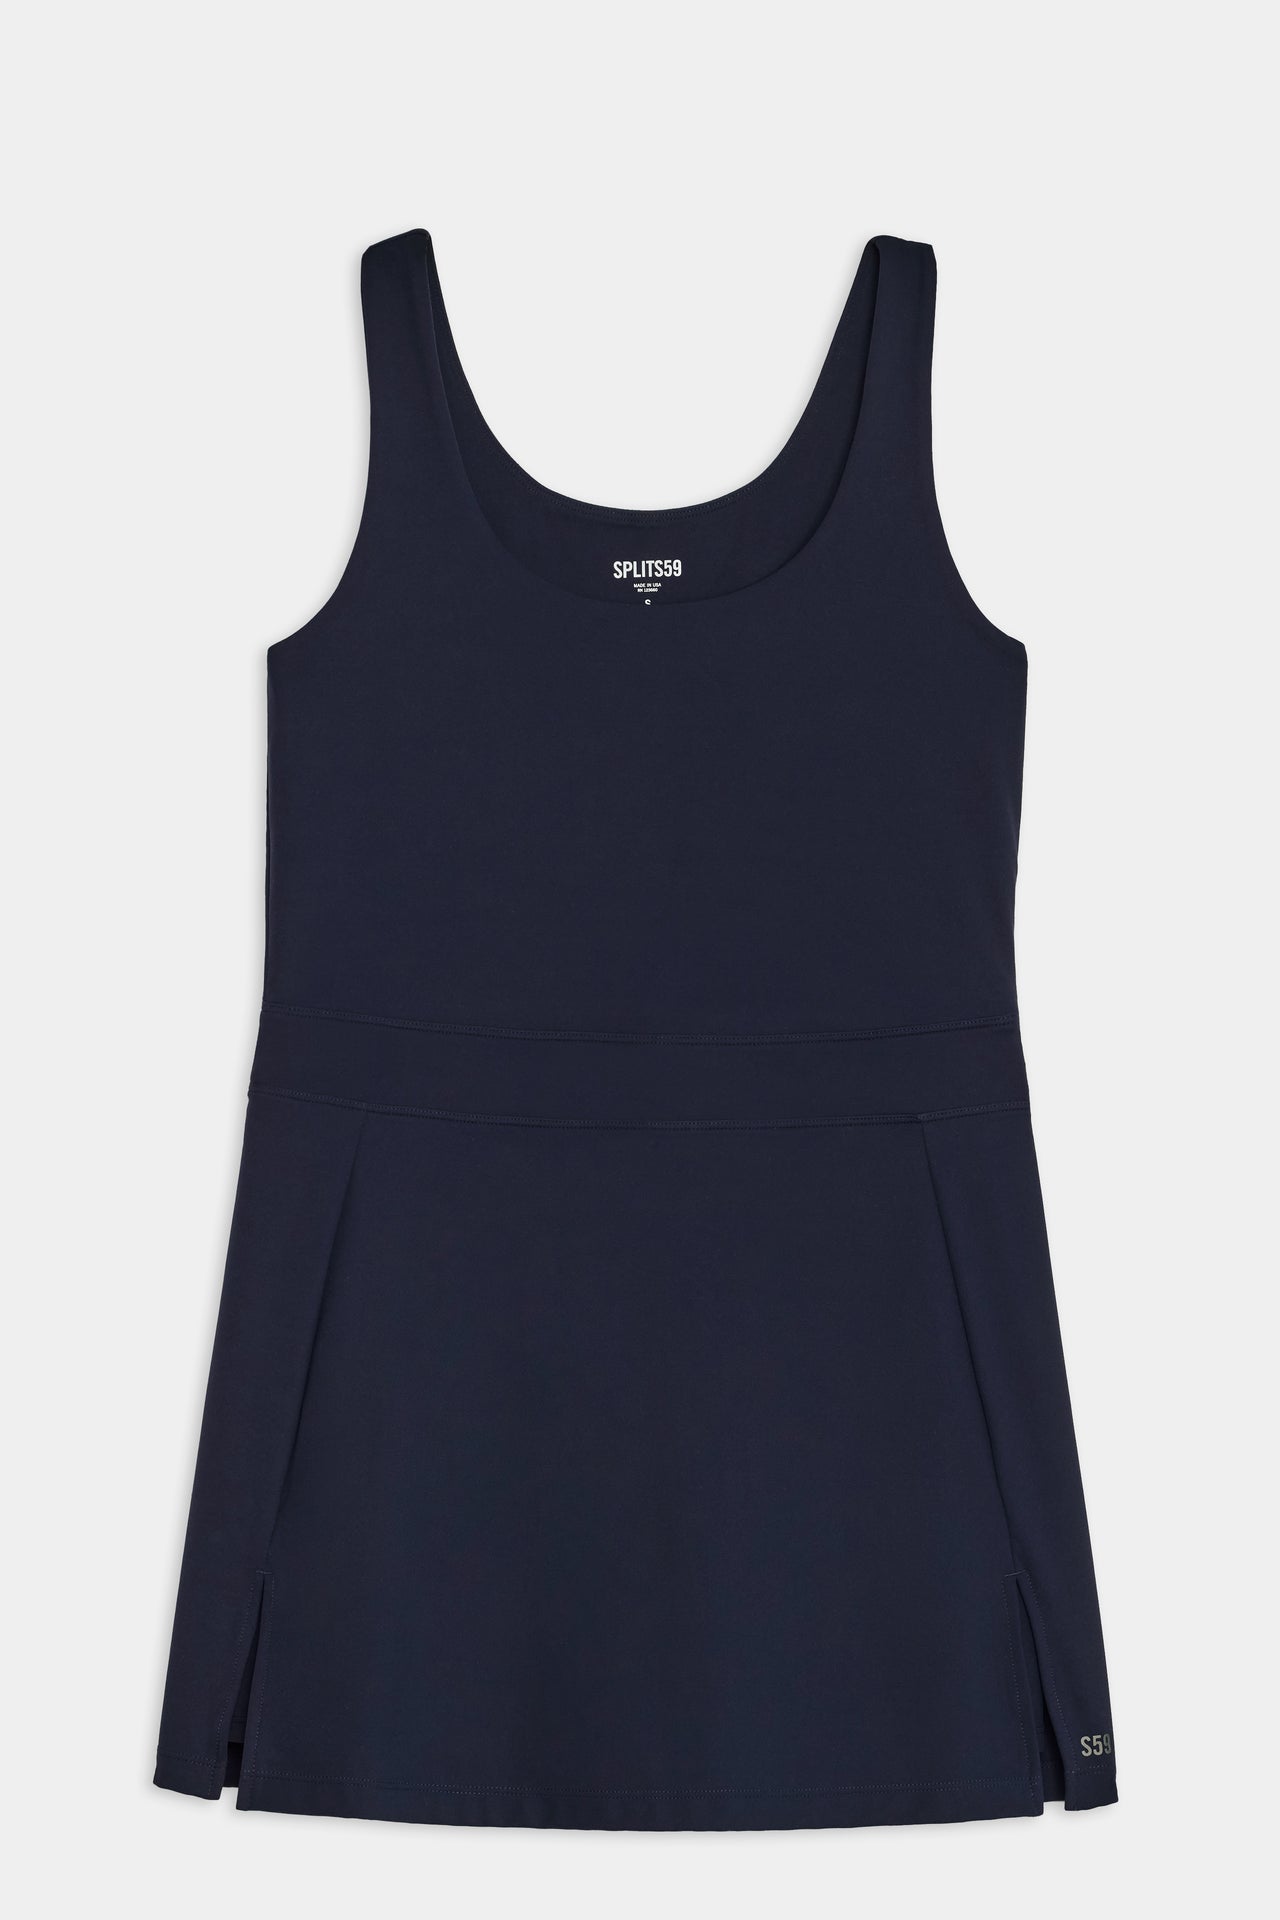 A SPLITS59 women's tank top in navy, suitable for high impact workouts.